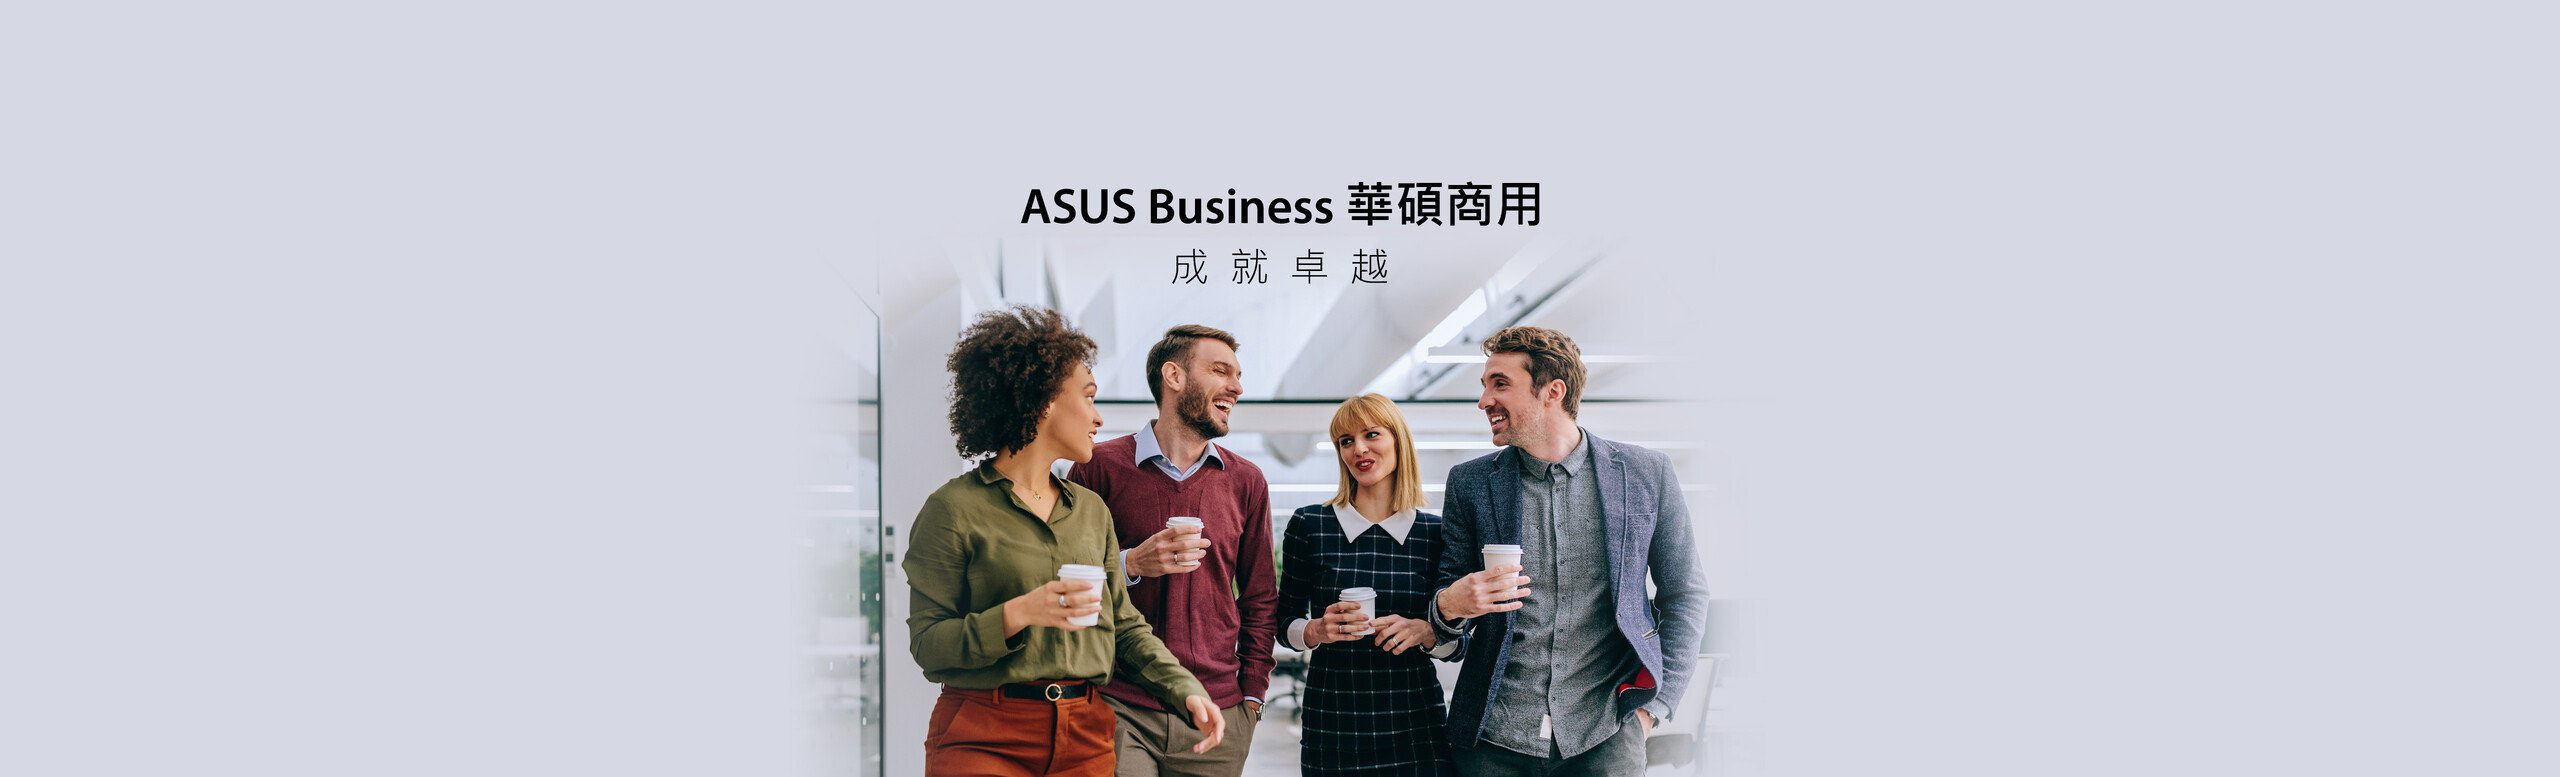 ASUS Business home page banner